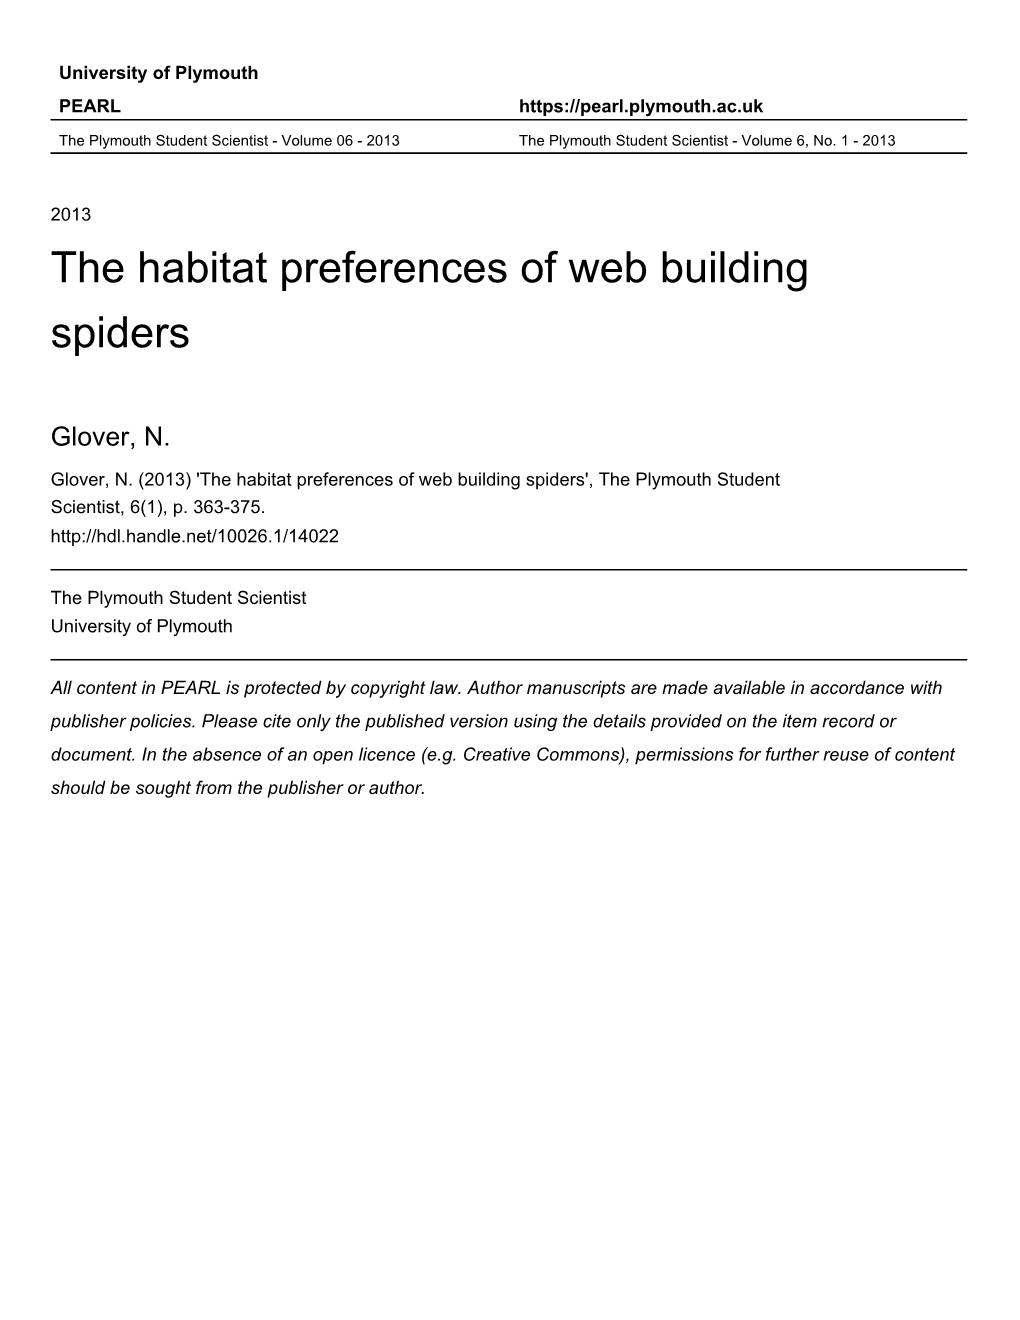 The Habitat Preferences of Web Building Spiders